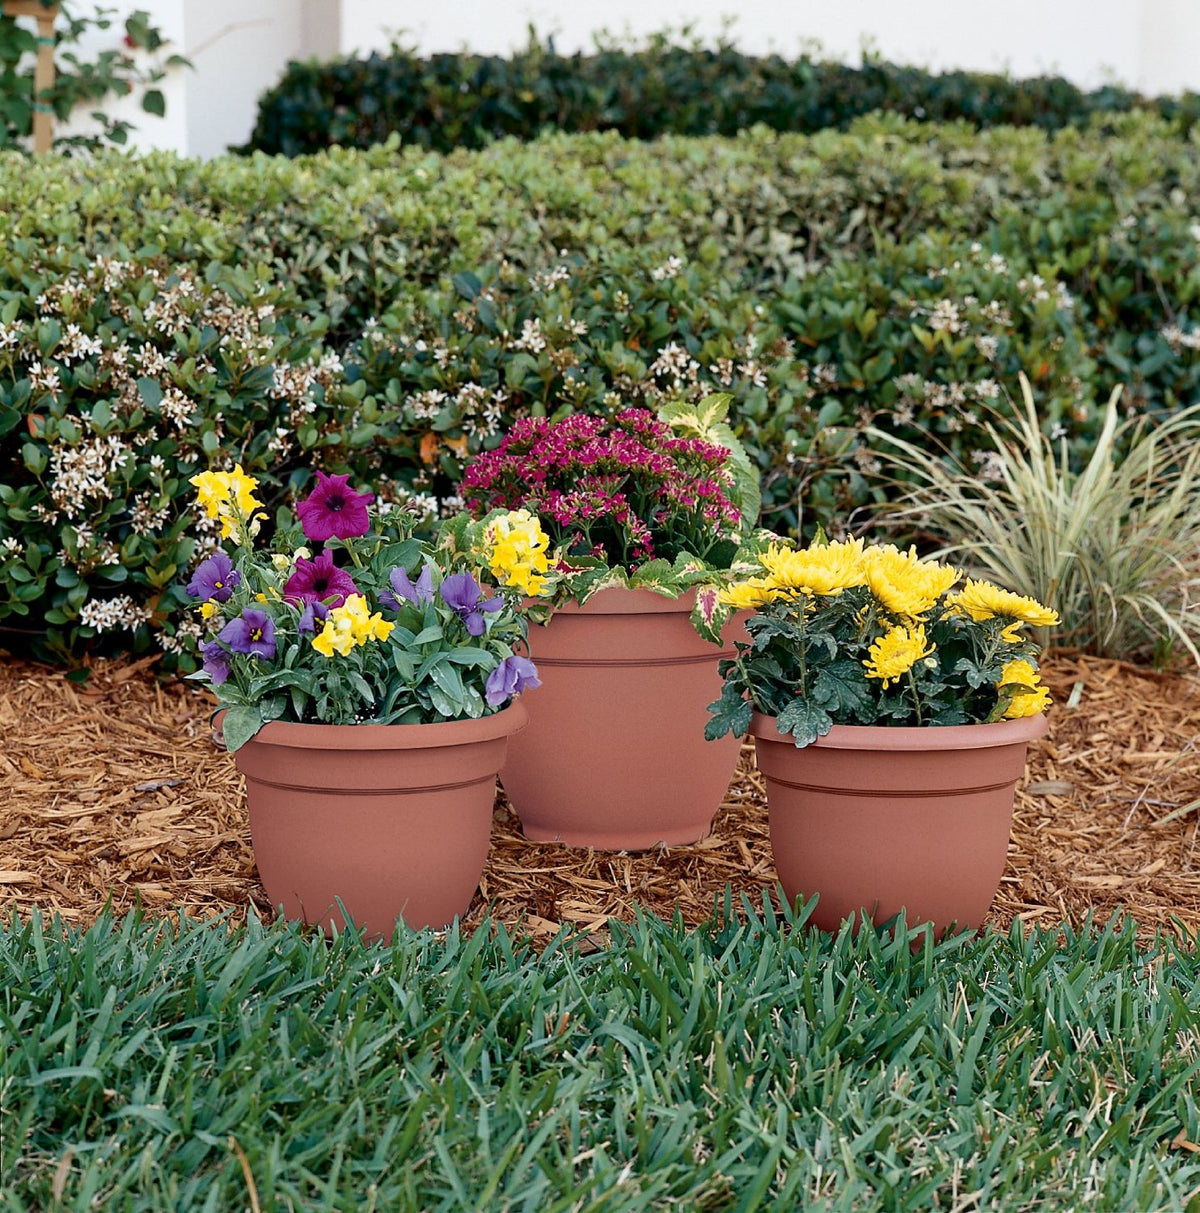 buy planters & pots at cheap rate in bulk. wholesale & retail garden maintenance tools store.